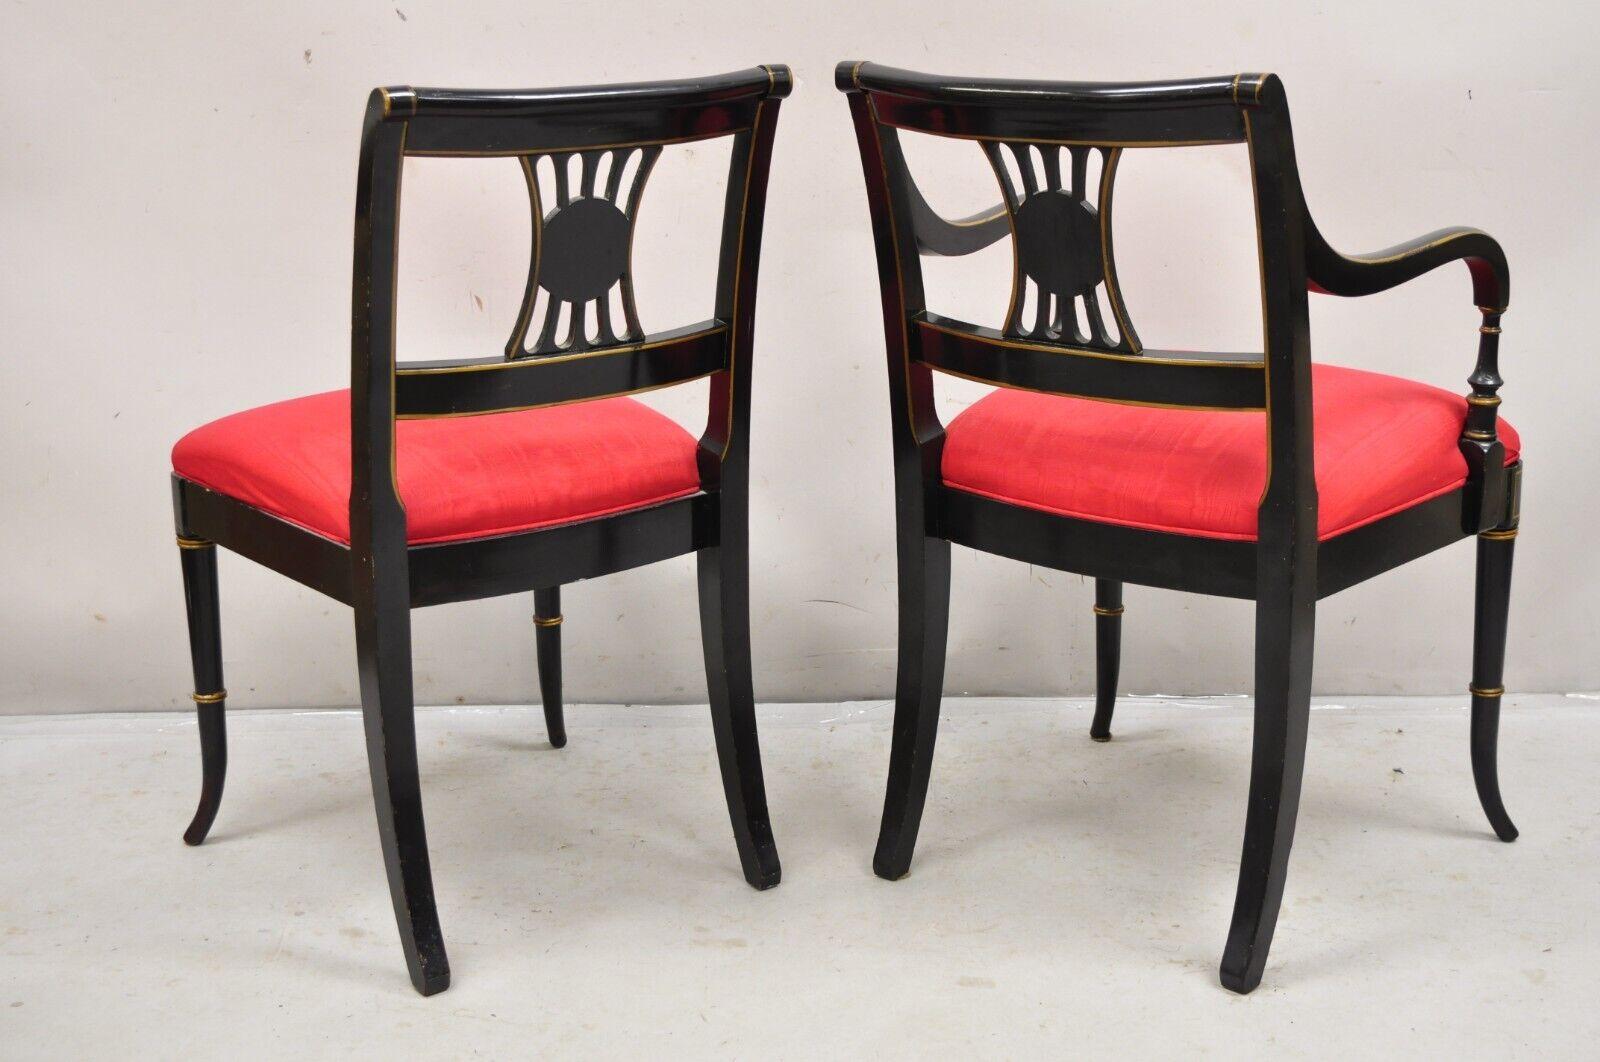 Union National Chinoiserie English Regency Black Painted Dining Chair - Set of 6 en vente 2